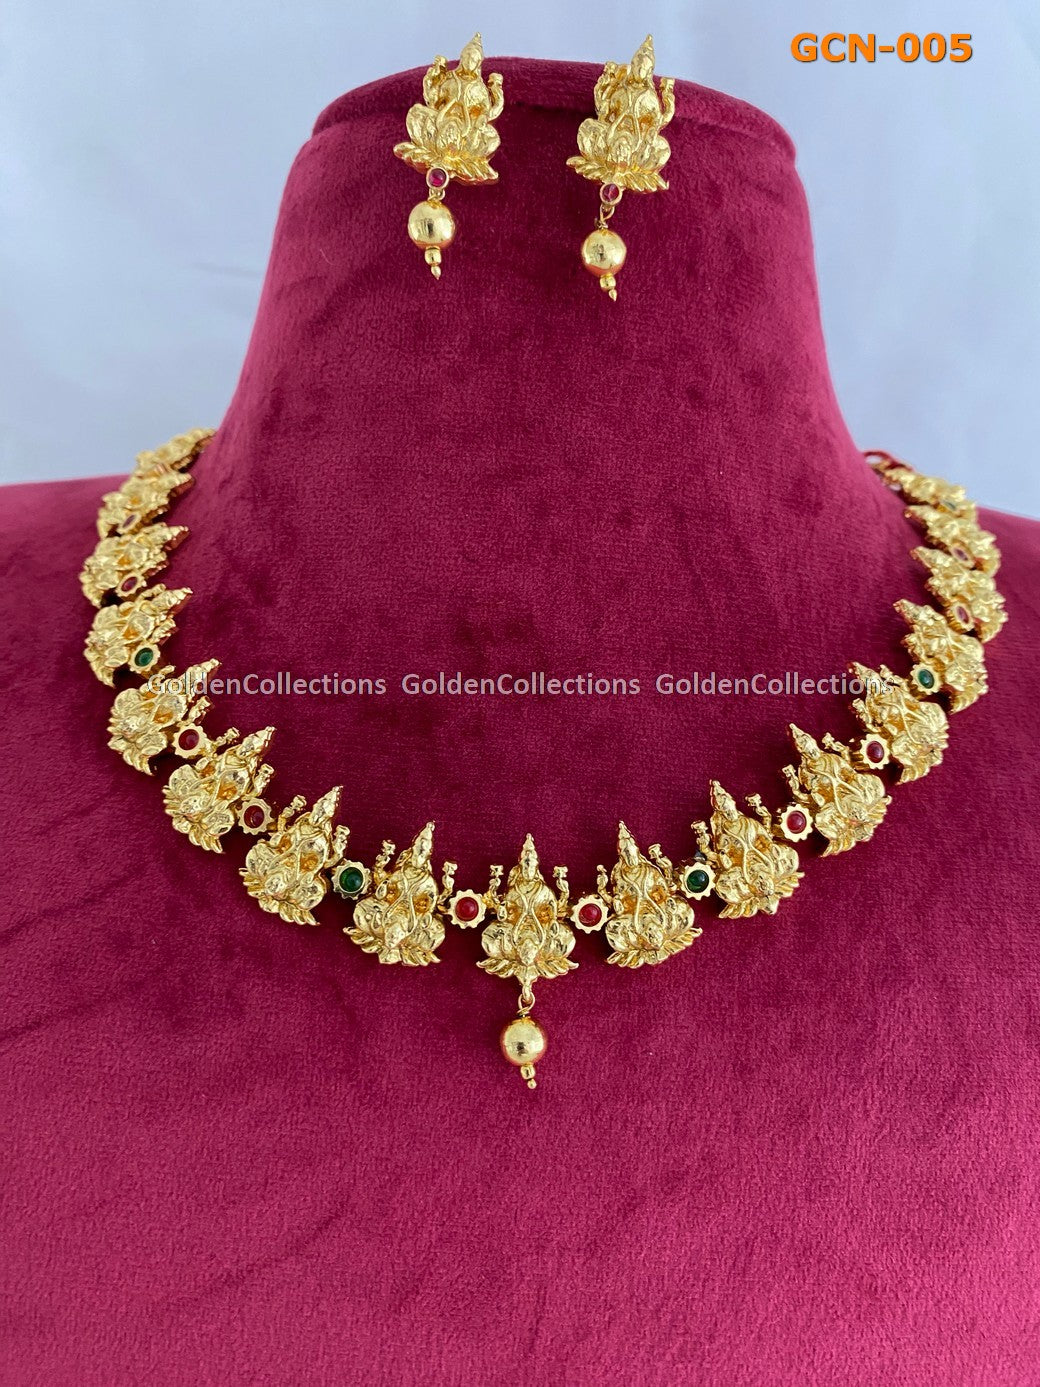 Gold Plated Necklace : 1 Gram Gold Lakshmi Haram GoldenCollections 